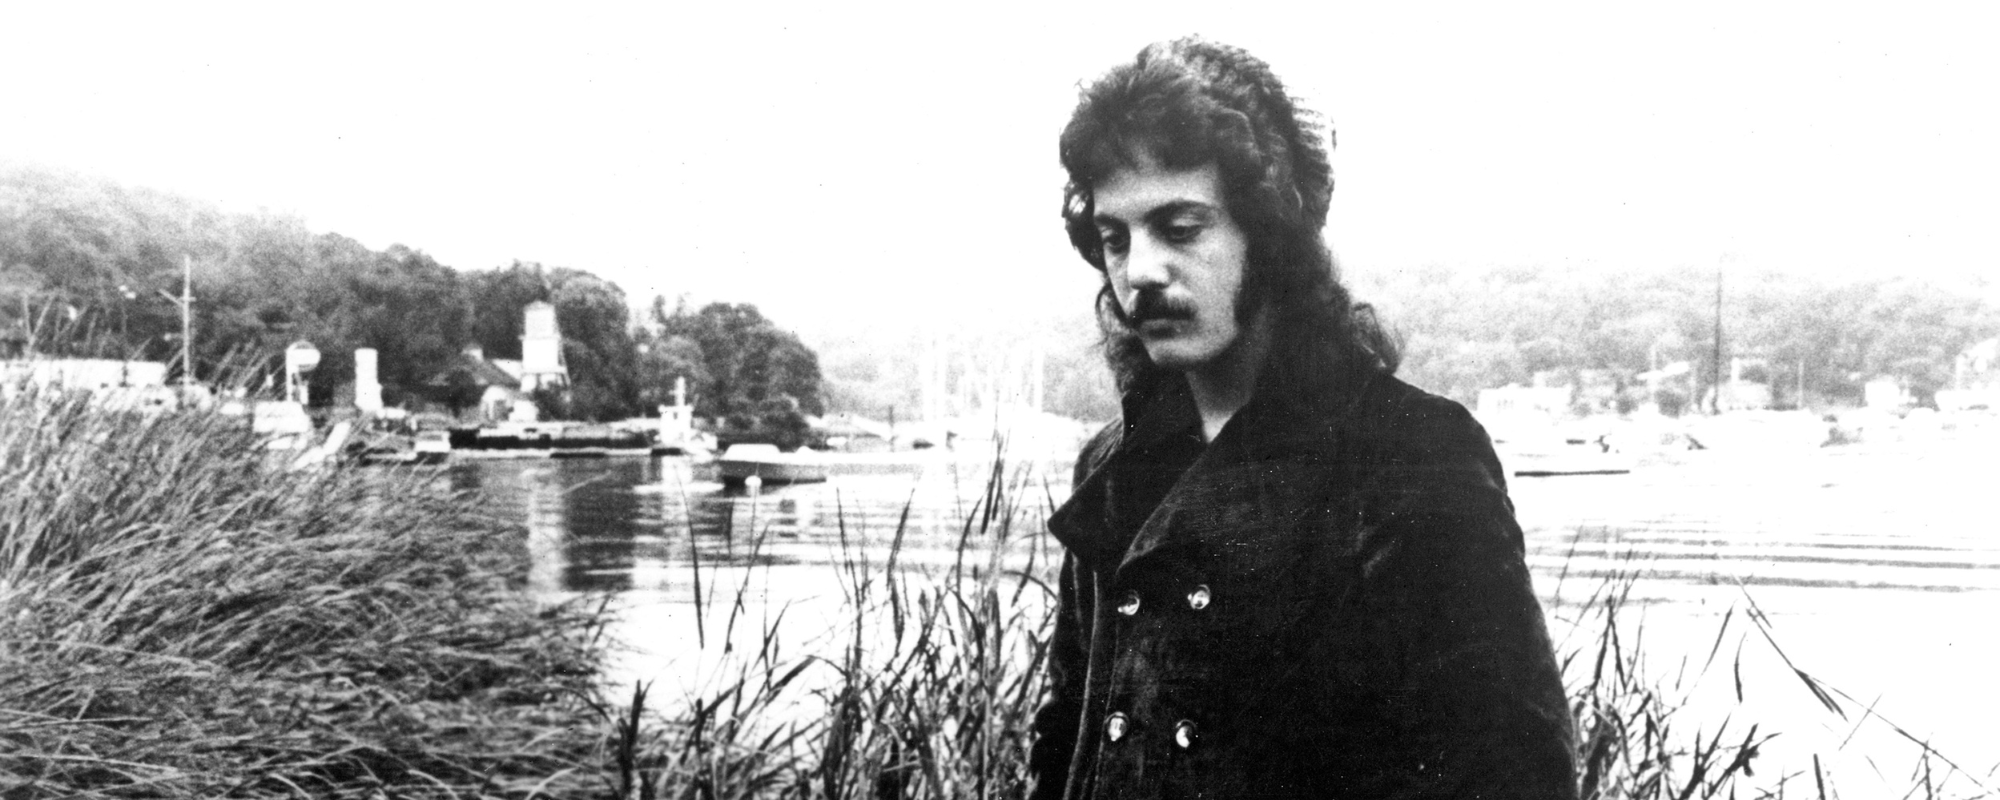 Bet You Didn’t Know About That Time Billy Joel Did a Metal Album